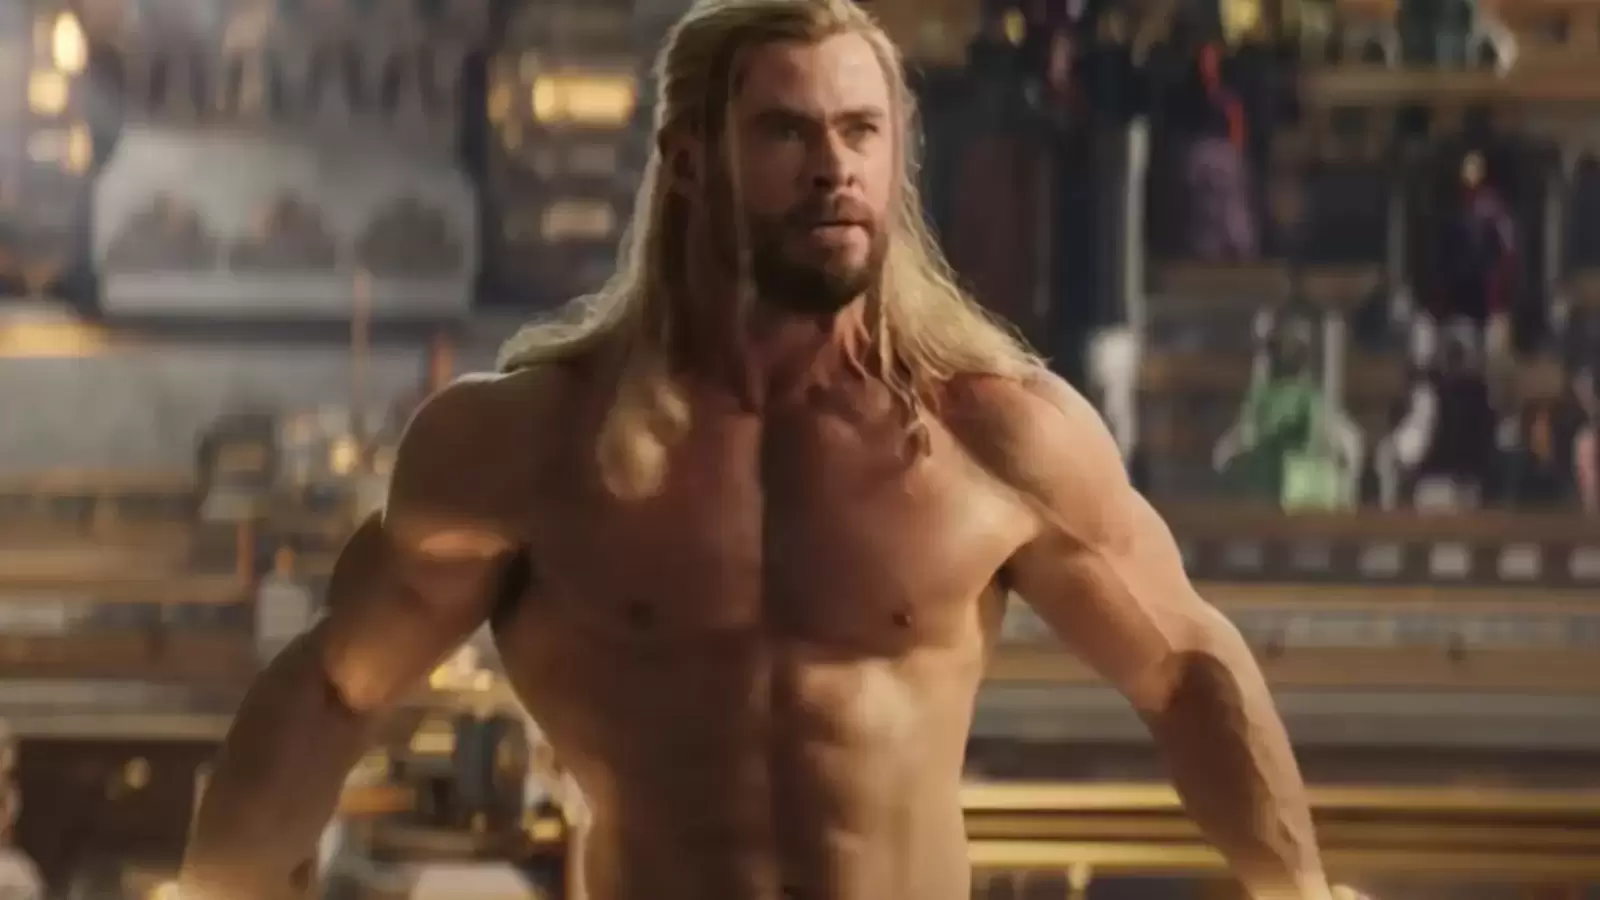 Chris Hemsworth says Thor Love and Thunder may be his last Marvel film: ‘Played that character for 10-11 years now’